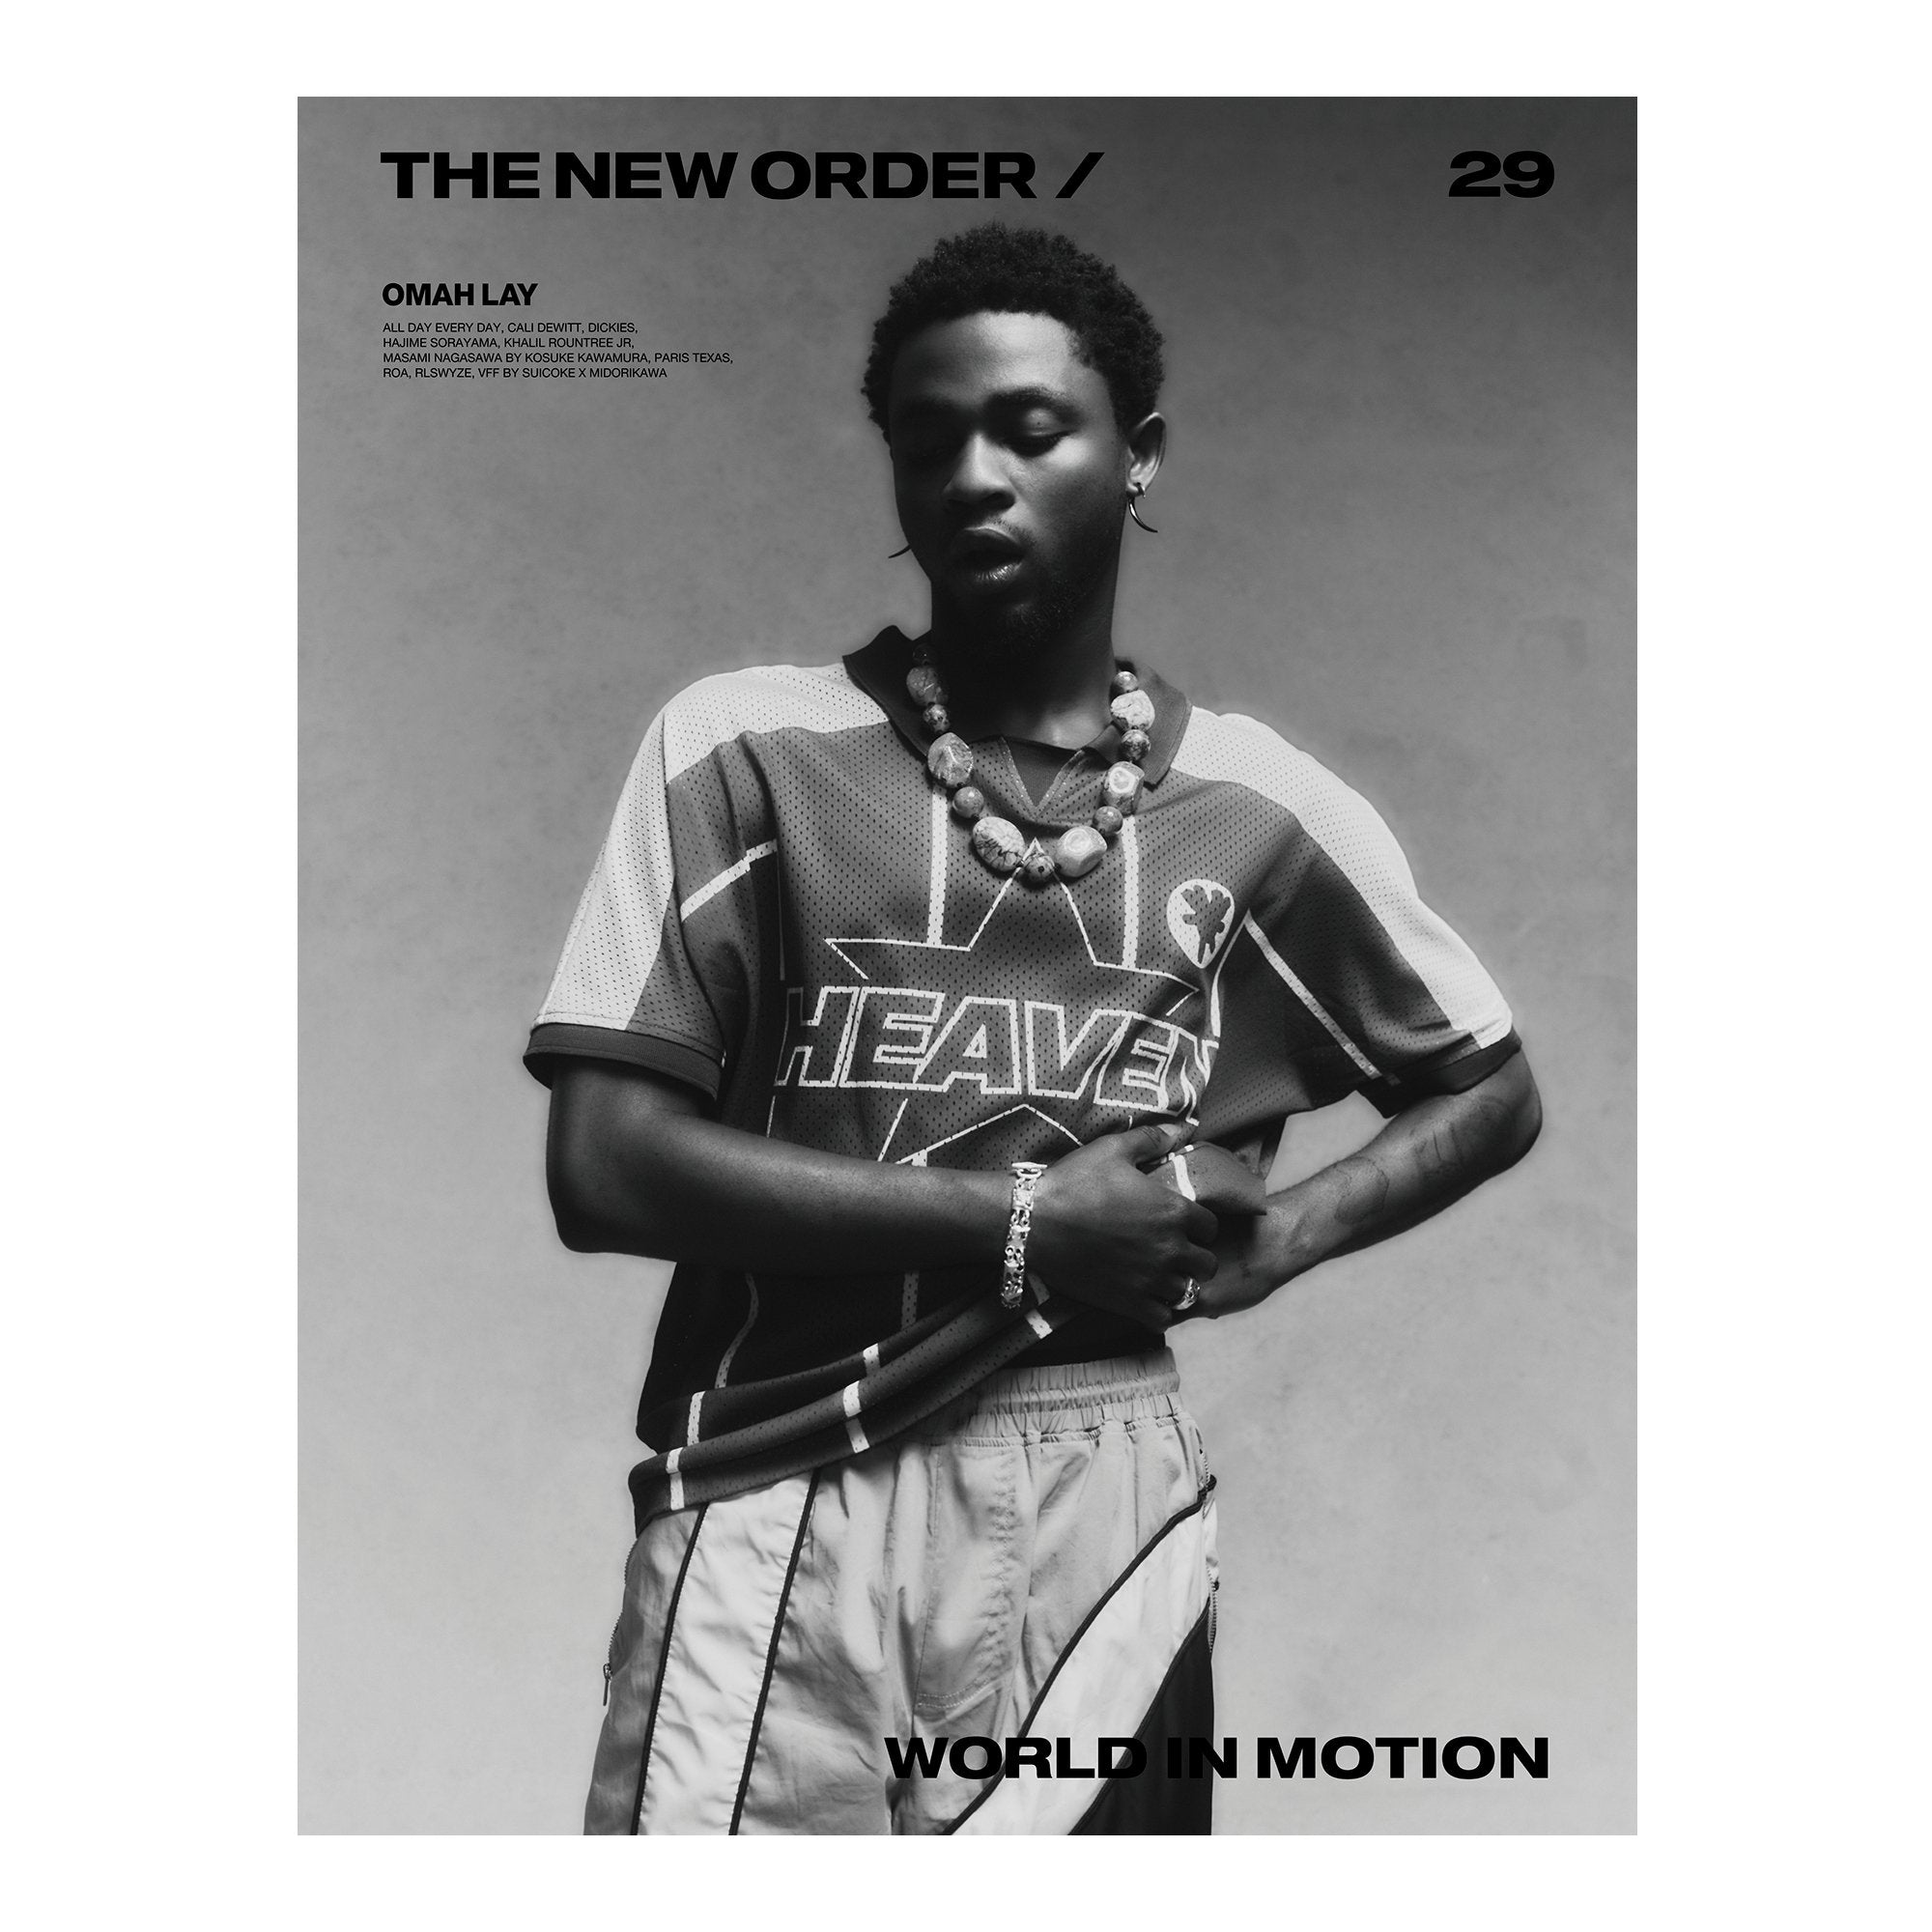 THE NEW ORDER ISSUE 29 - OMAH LAY